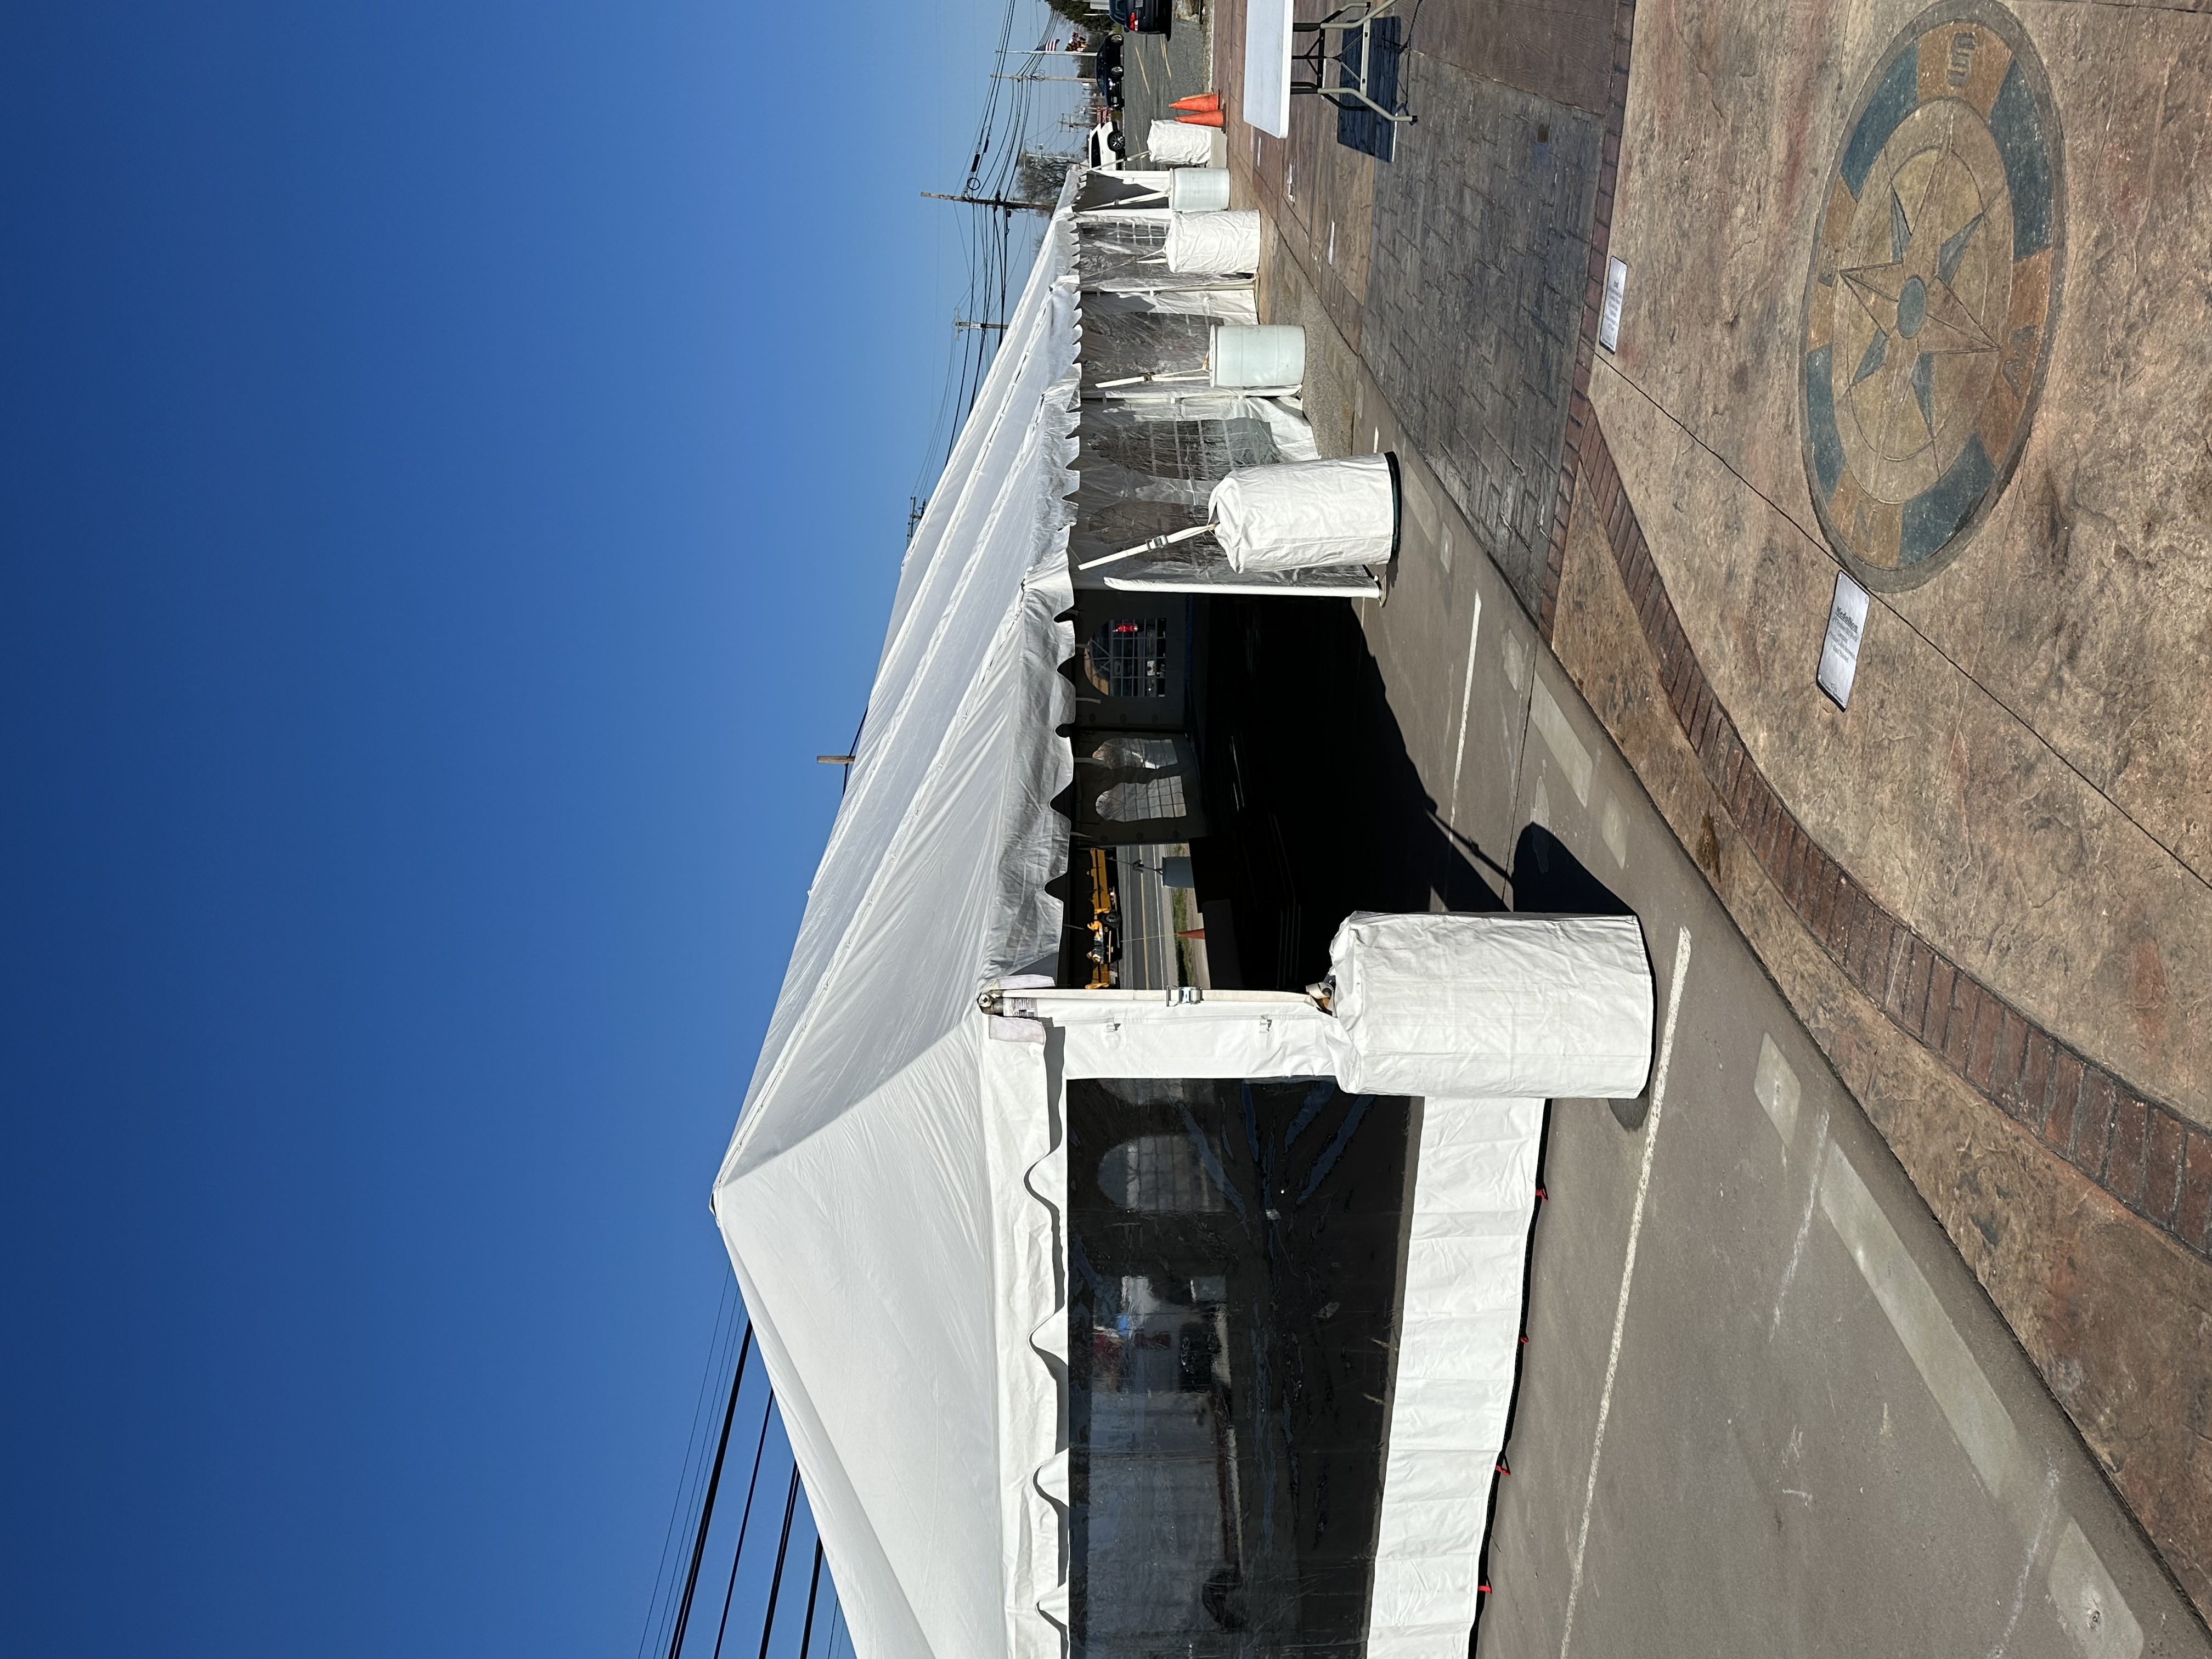 30x70 and 30x30 Frame Tents in Harford County